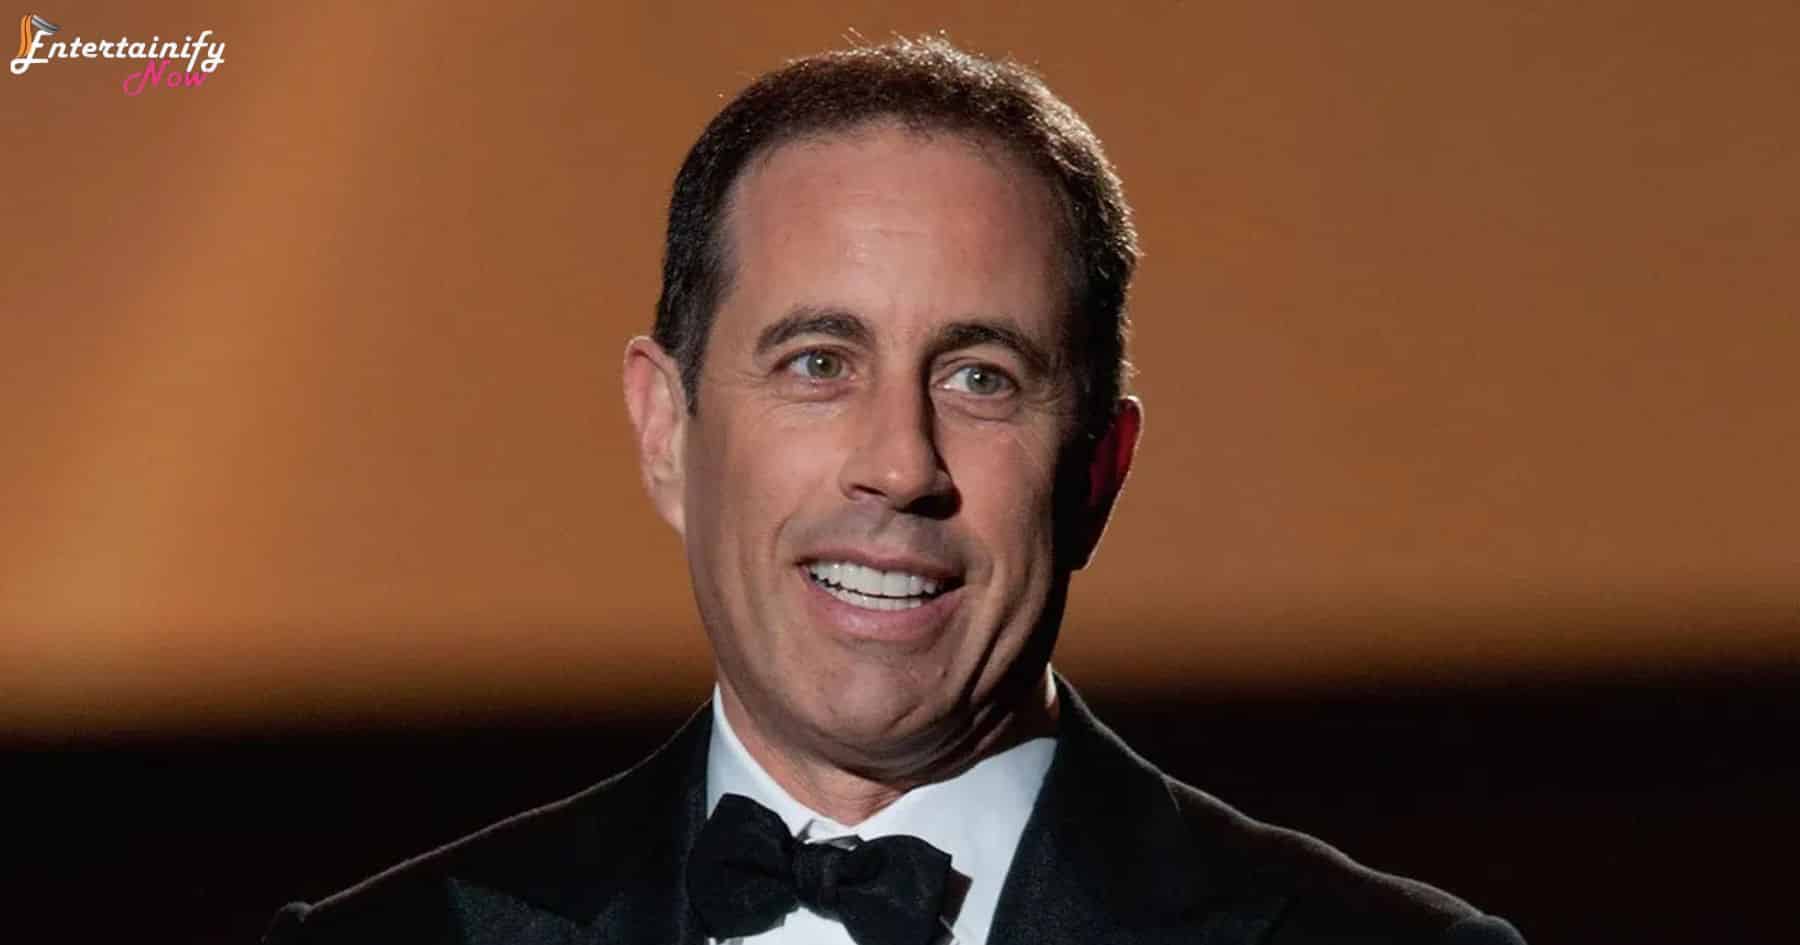 Jerry Seinfeld: The Wealthiest Comedian